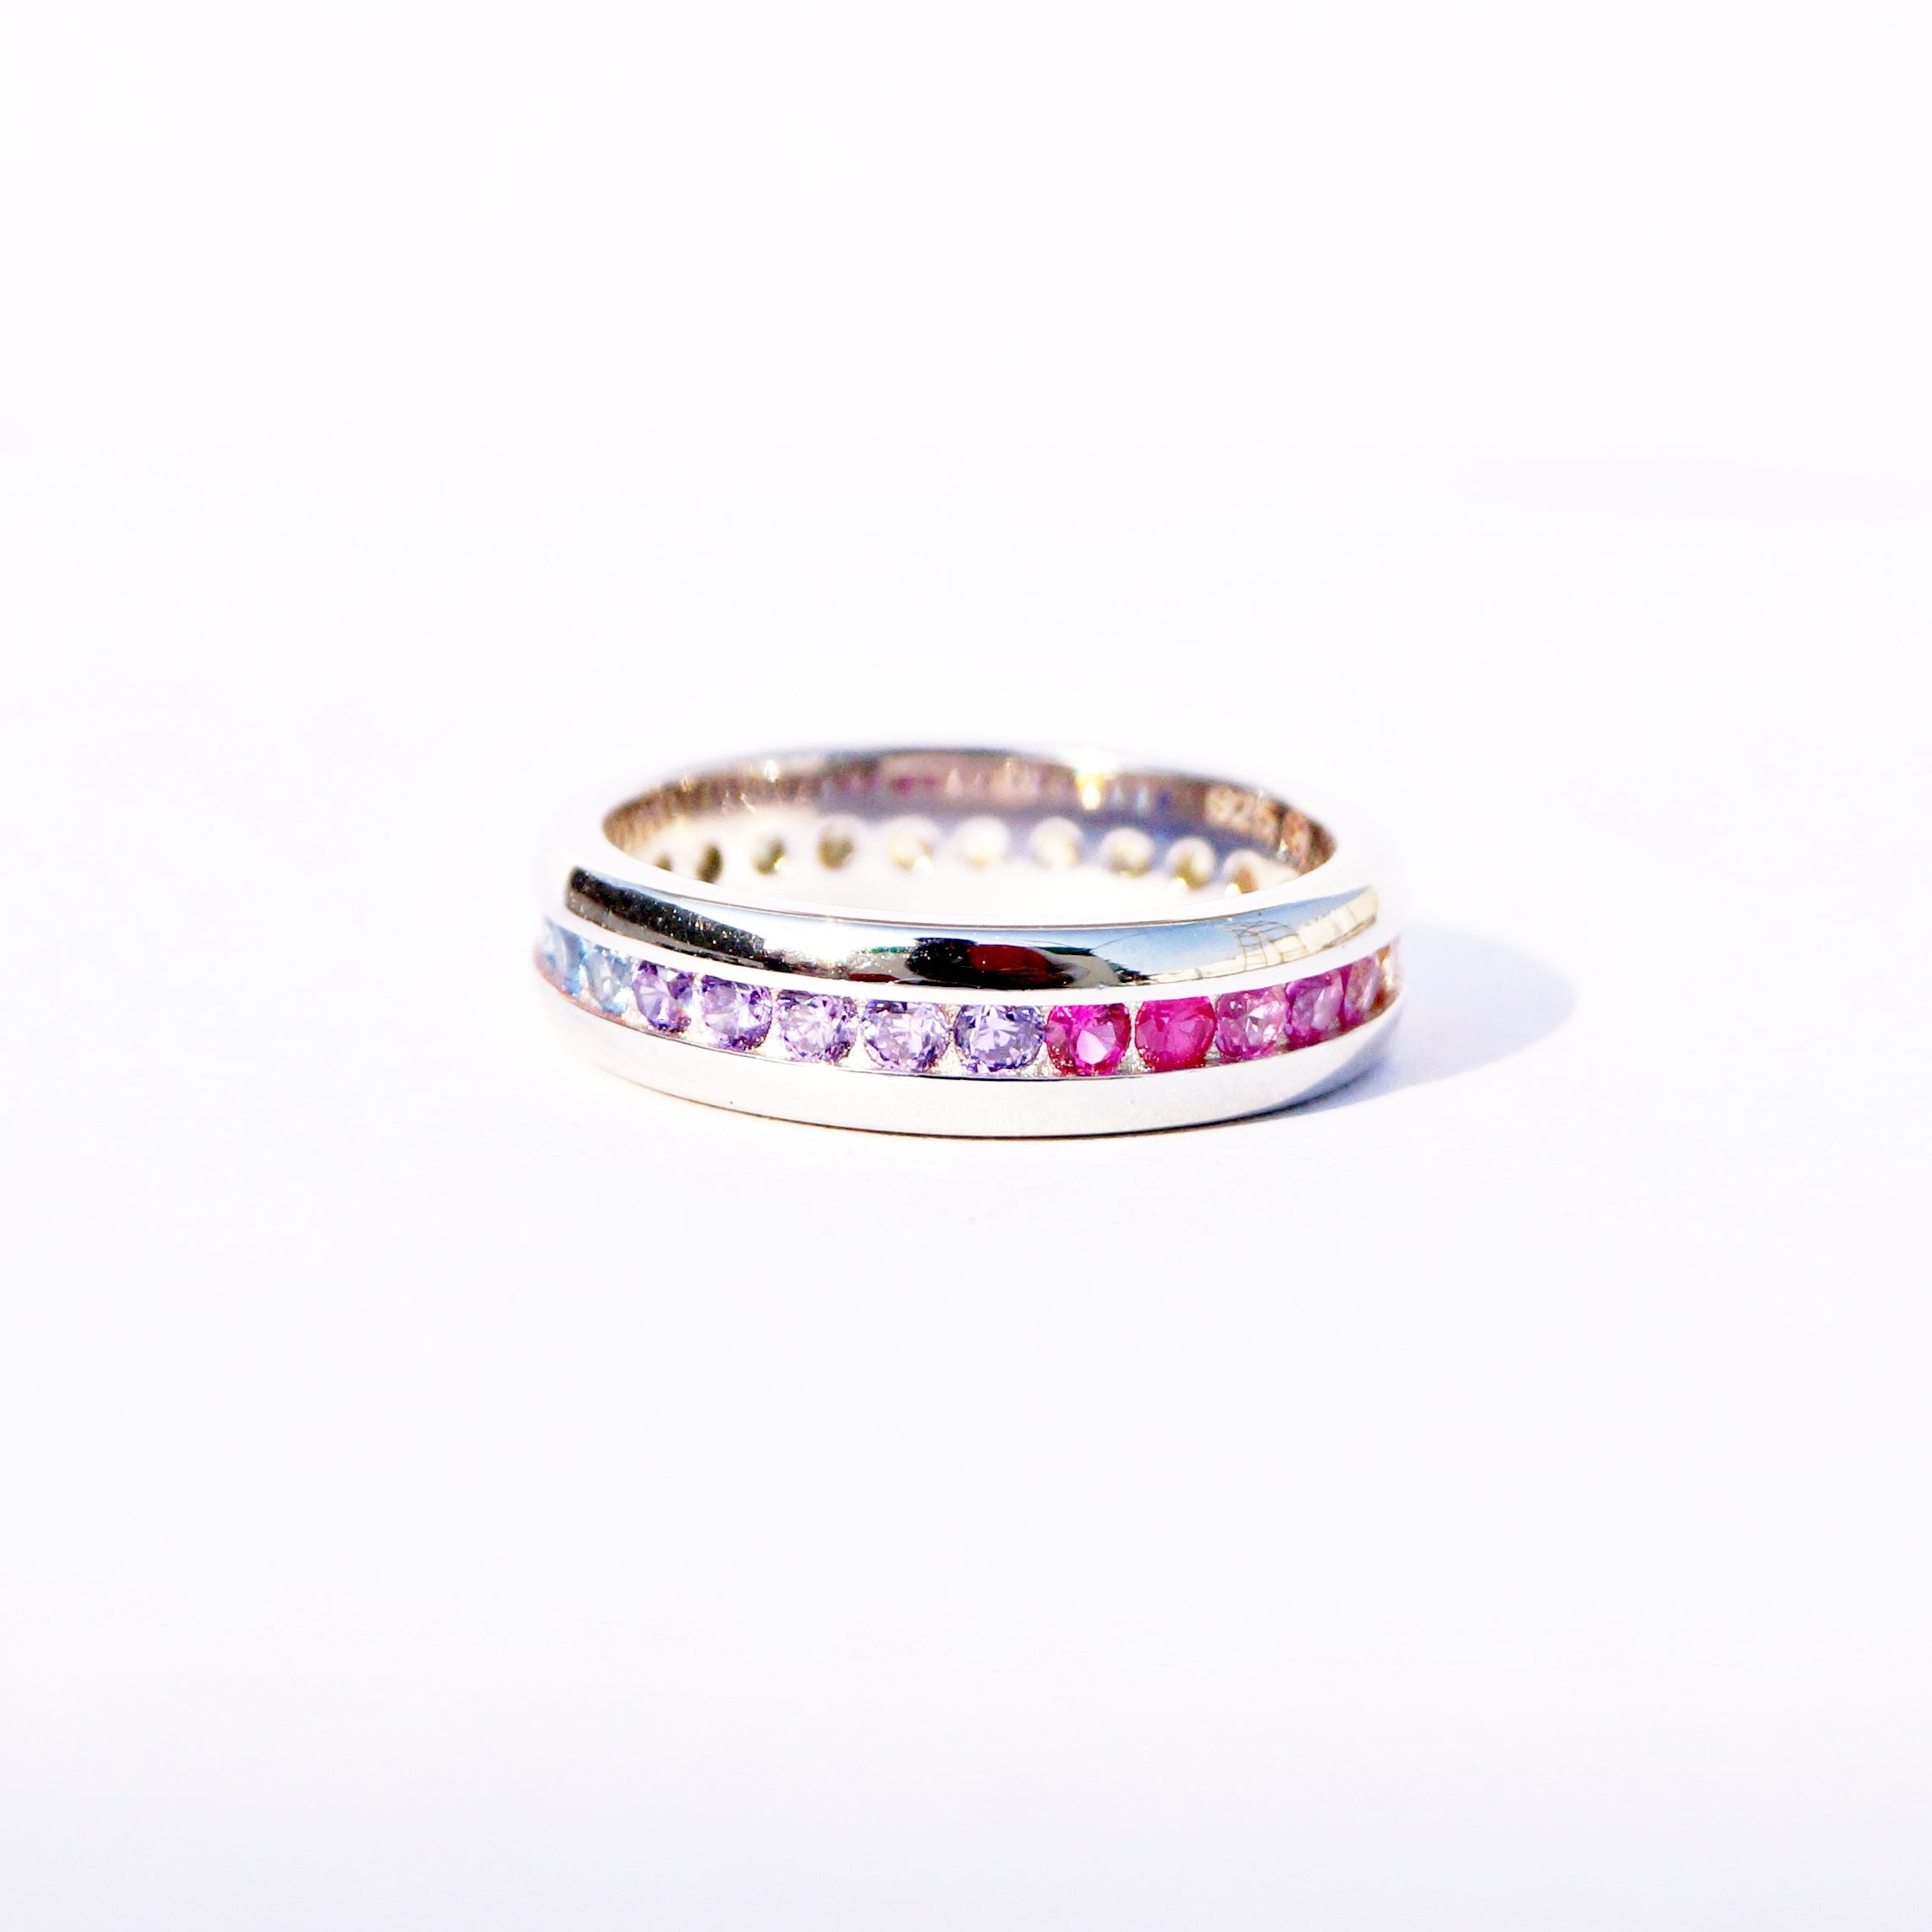 The Rainbow Band Ring